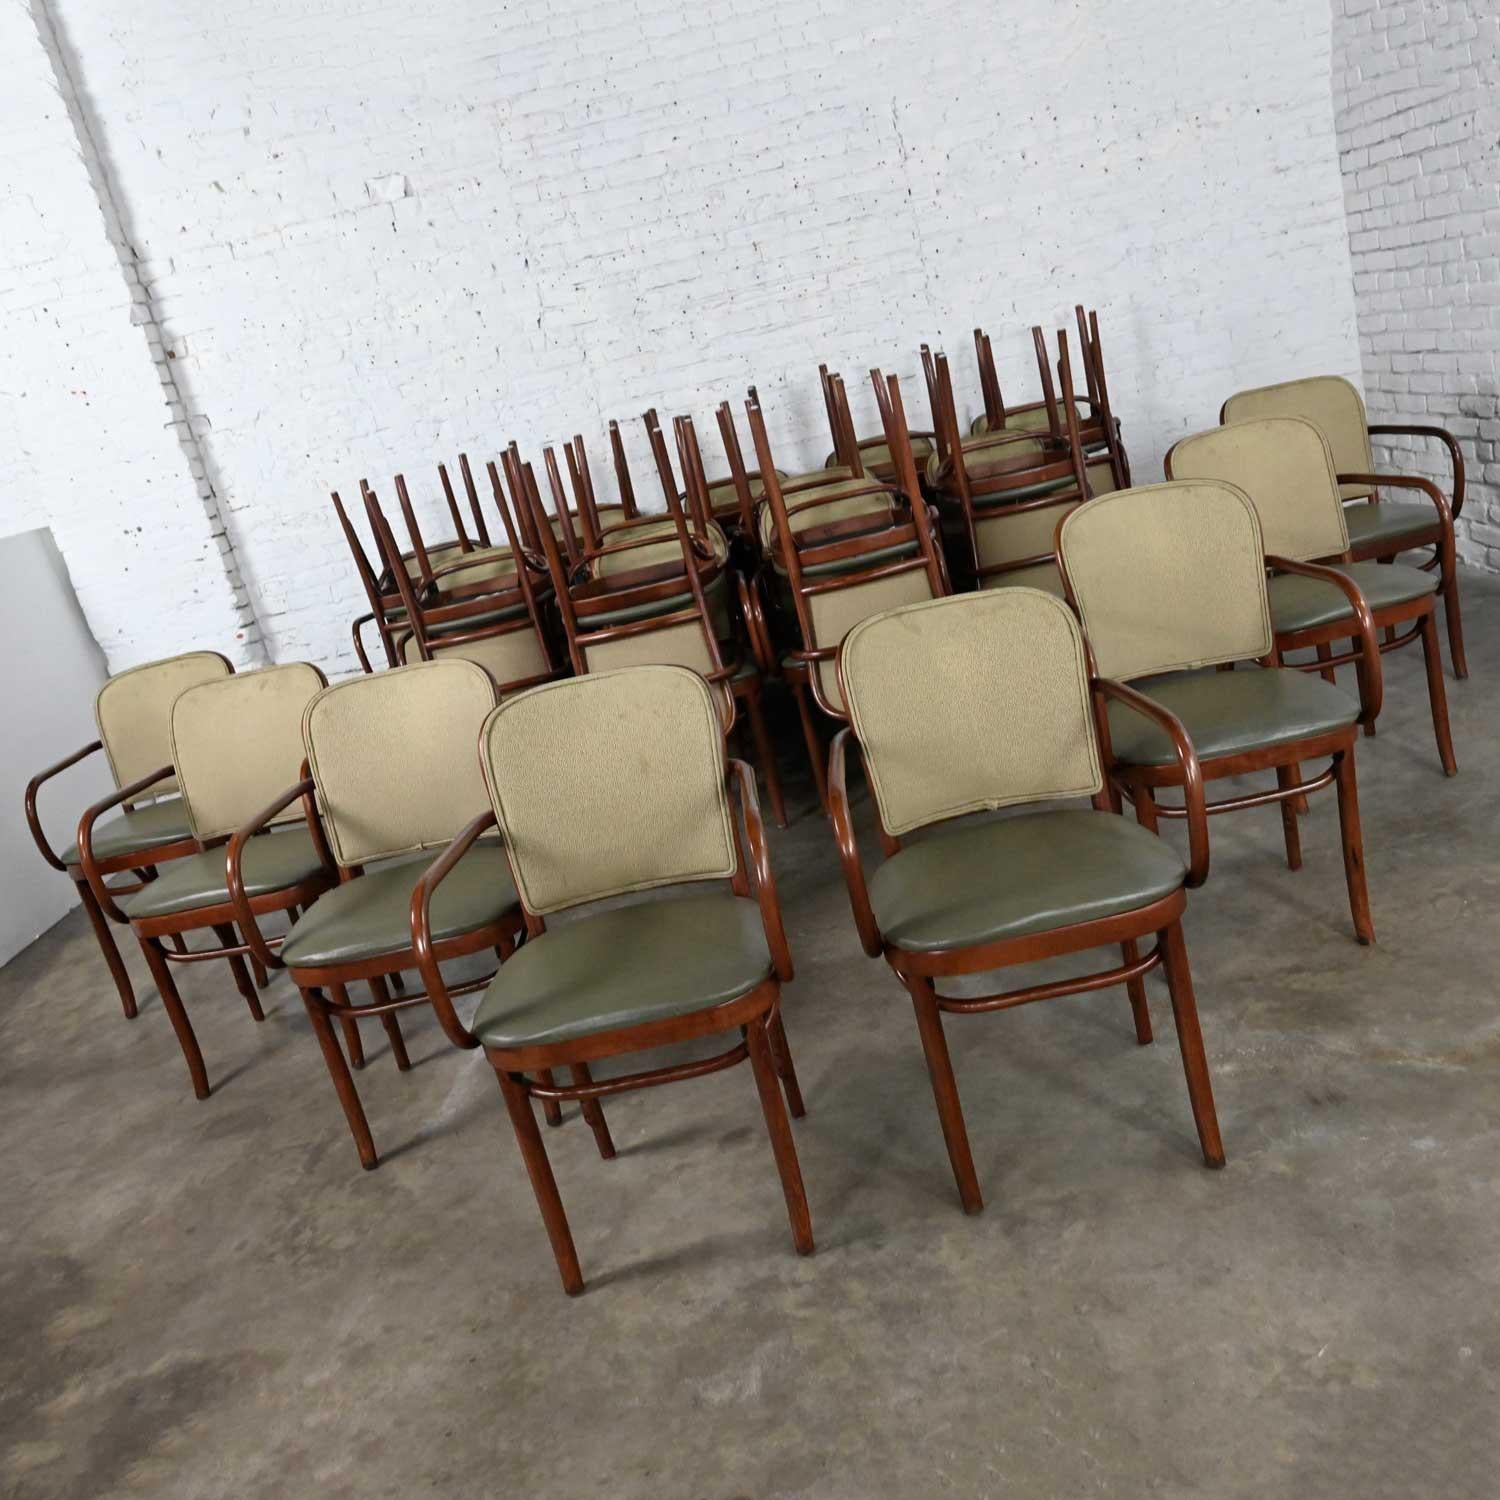 Wonderful vintage Bauhaus oak bentwood Josef Hoffman Prague 811 armchairs by Thonet. We have 22 and we are selling them separately. One chair has a different fabric on the seat back. Beautiful condition, keeping in mind that these are vintage and